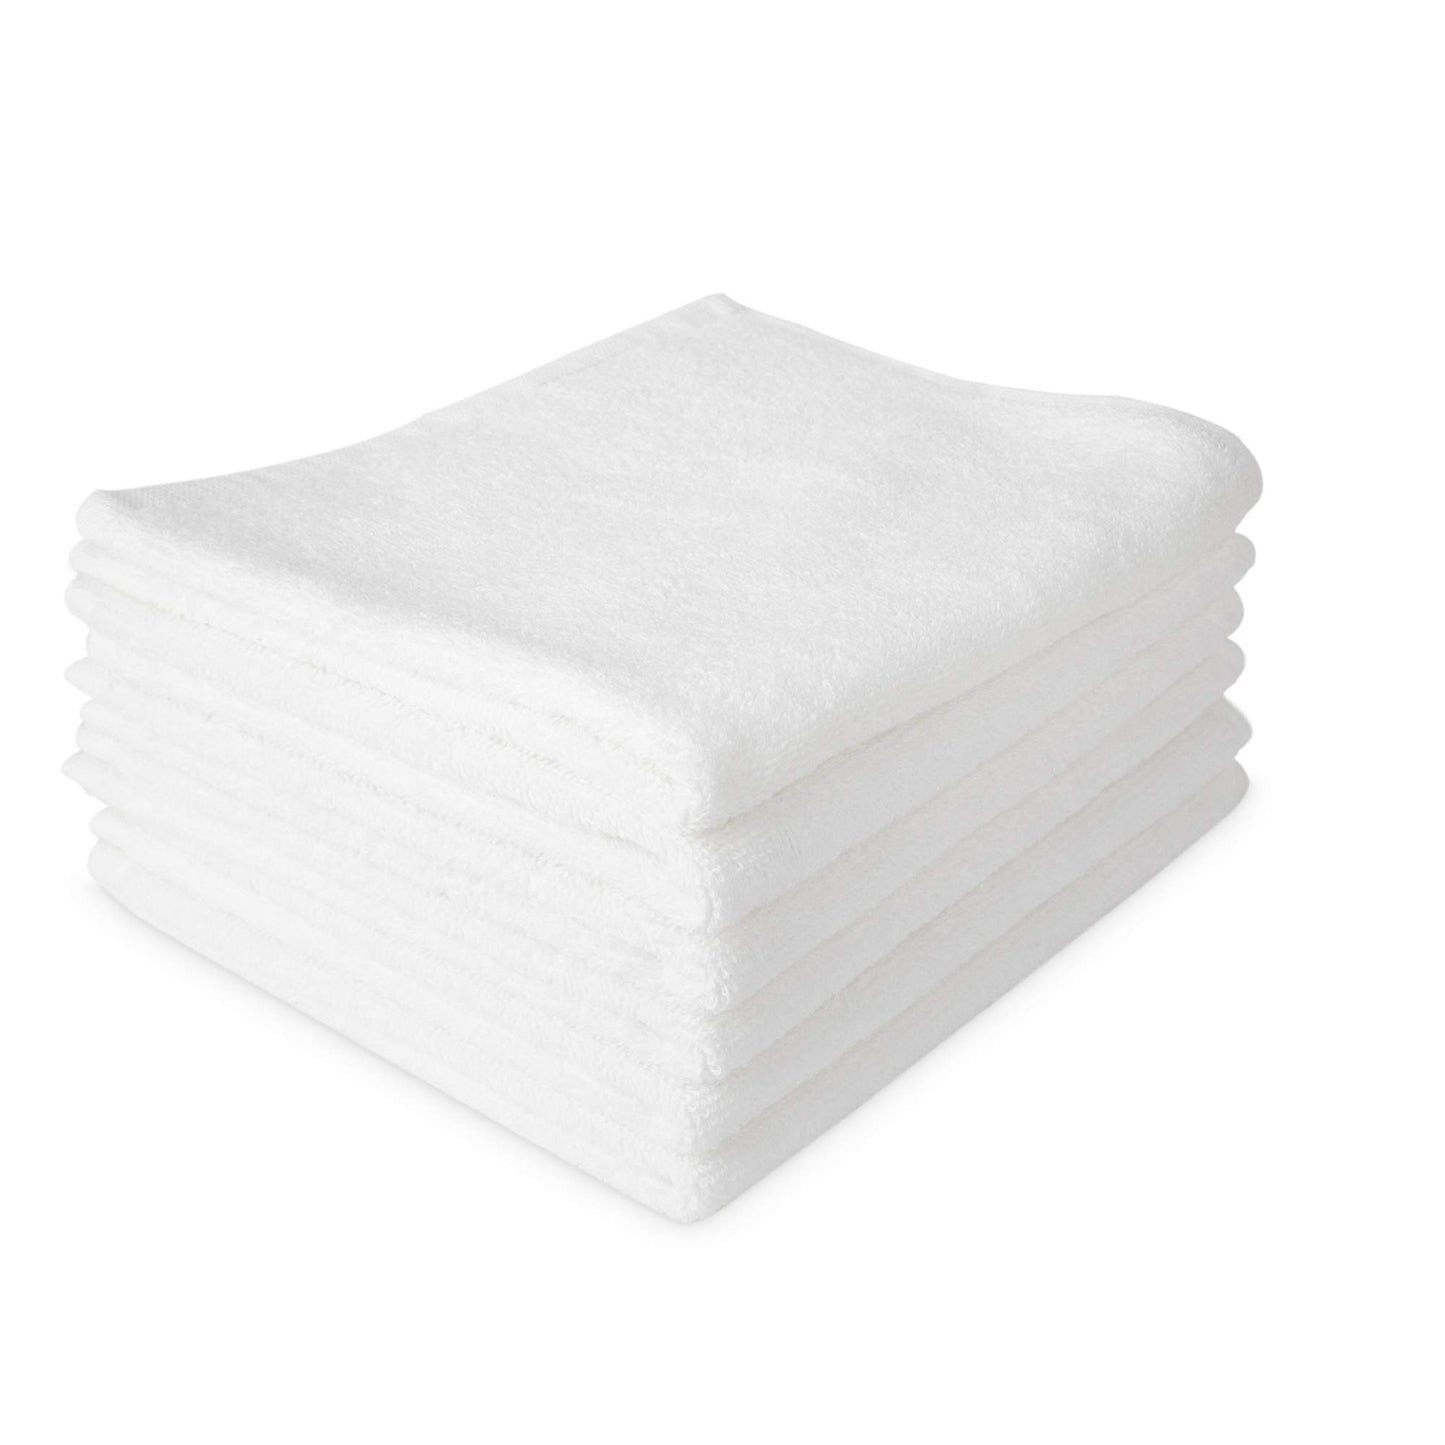 RosenSoft Oversized Wash Clothes-16x14 in Extra Large Wash Cloths for Body and Face, Hand Gym Spa- Fingertip Towels for Bathroom, Bath Towel Set (White, 6)